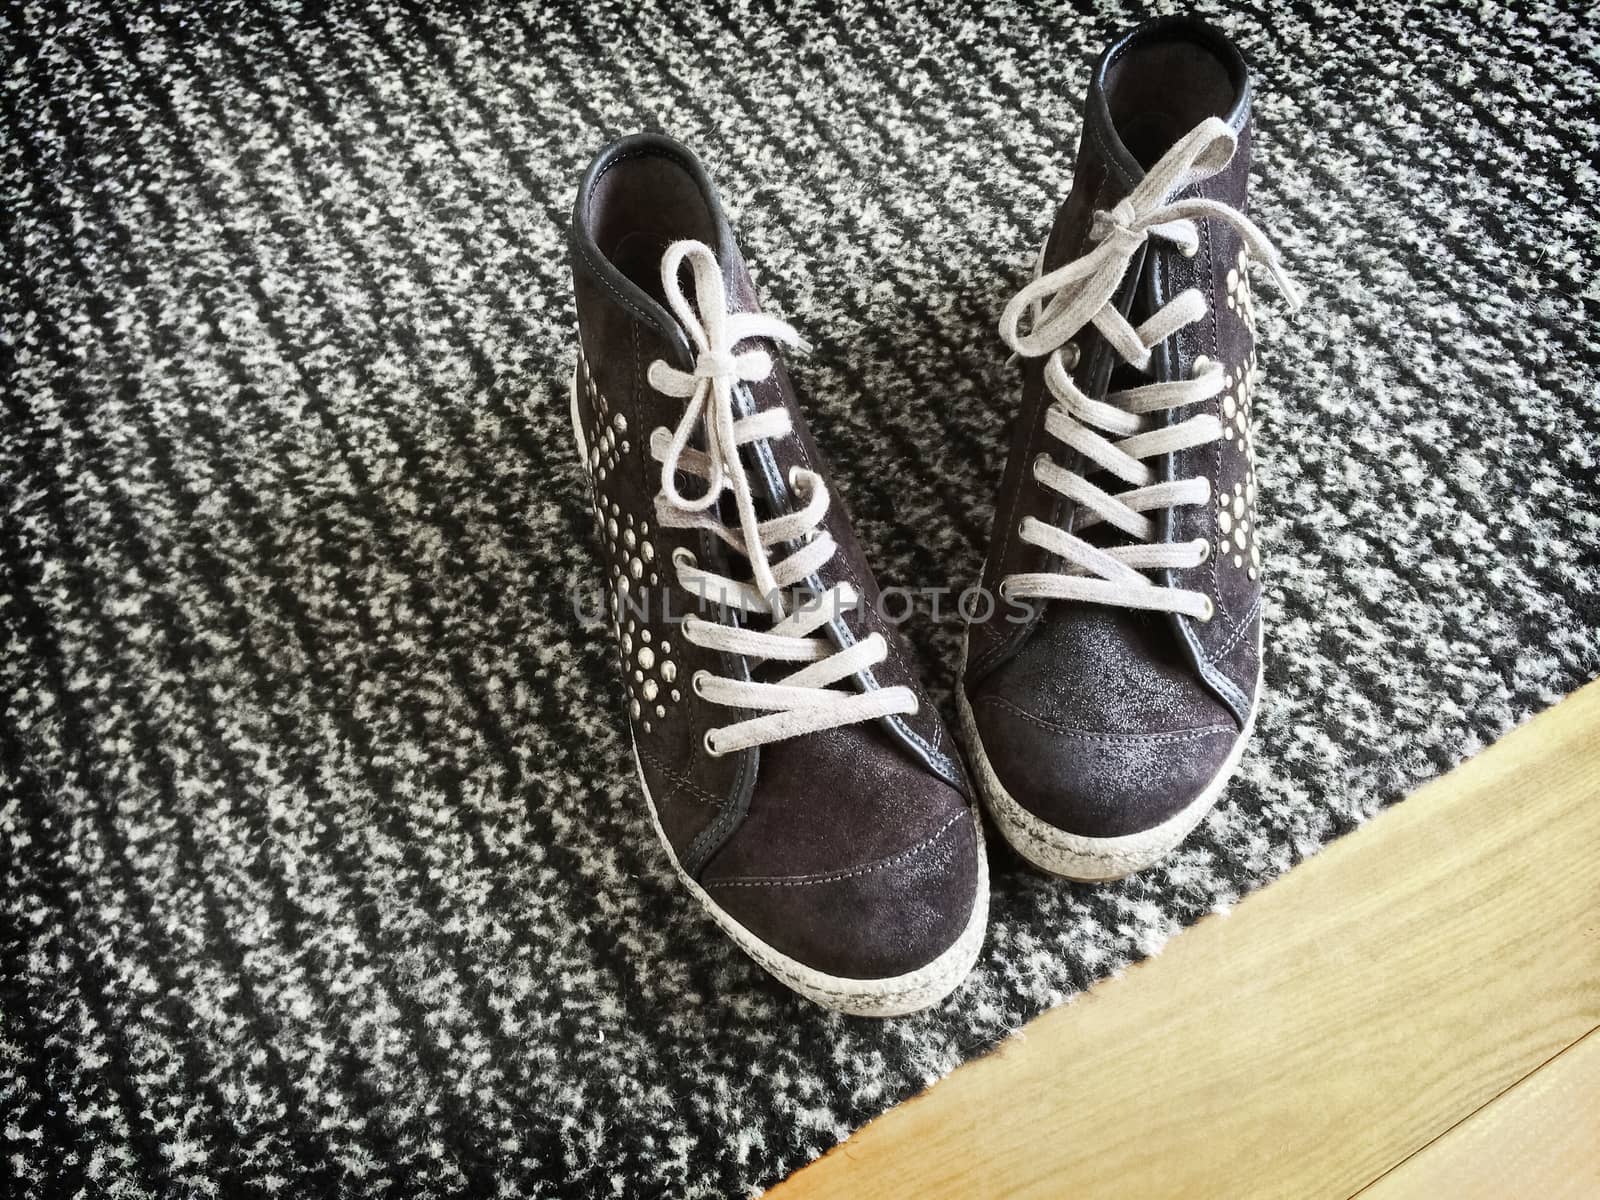 Fashionable shoes with metal rivets on gray striped carpet.